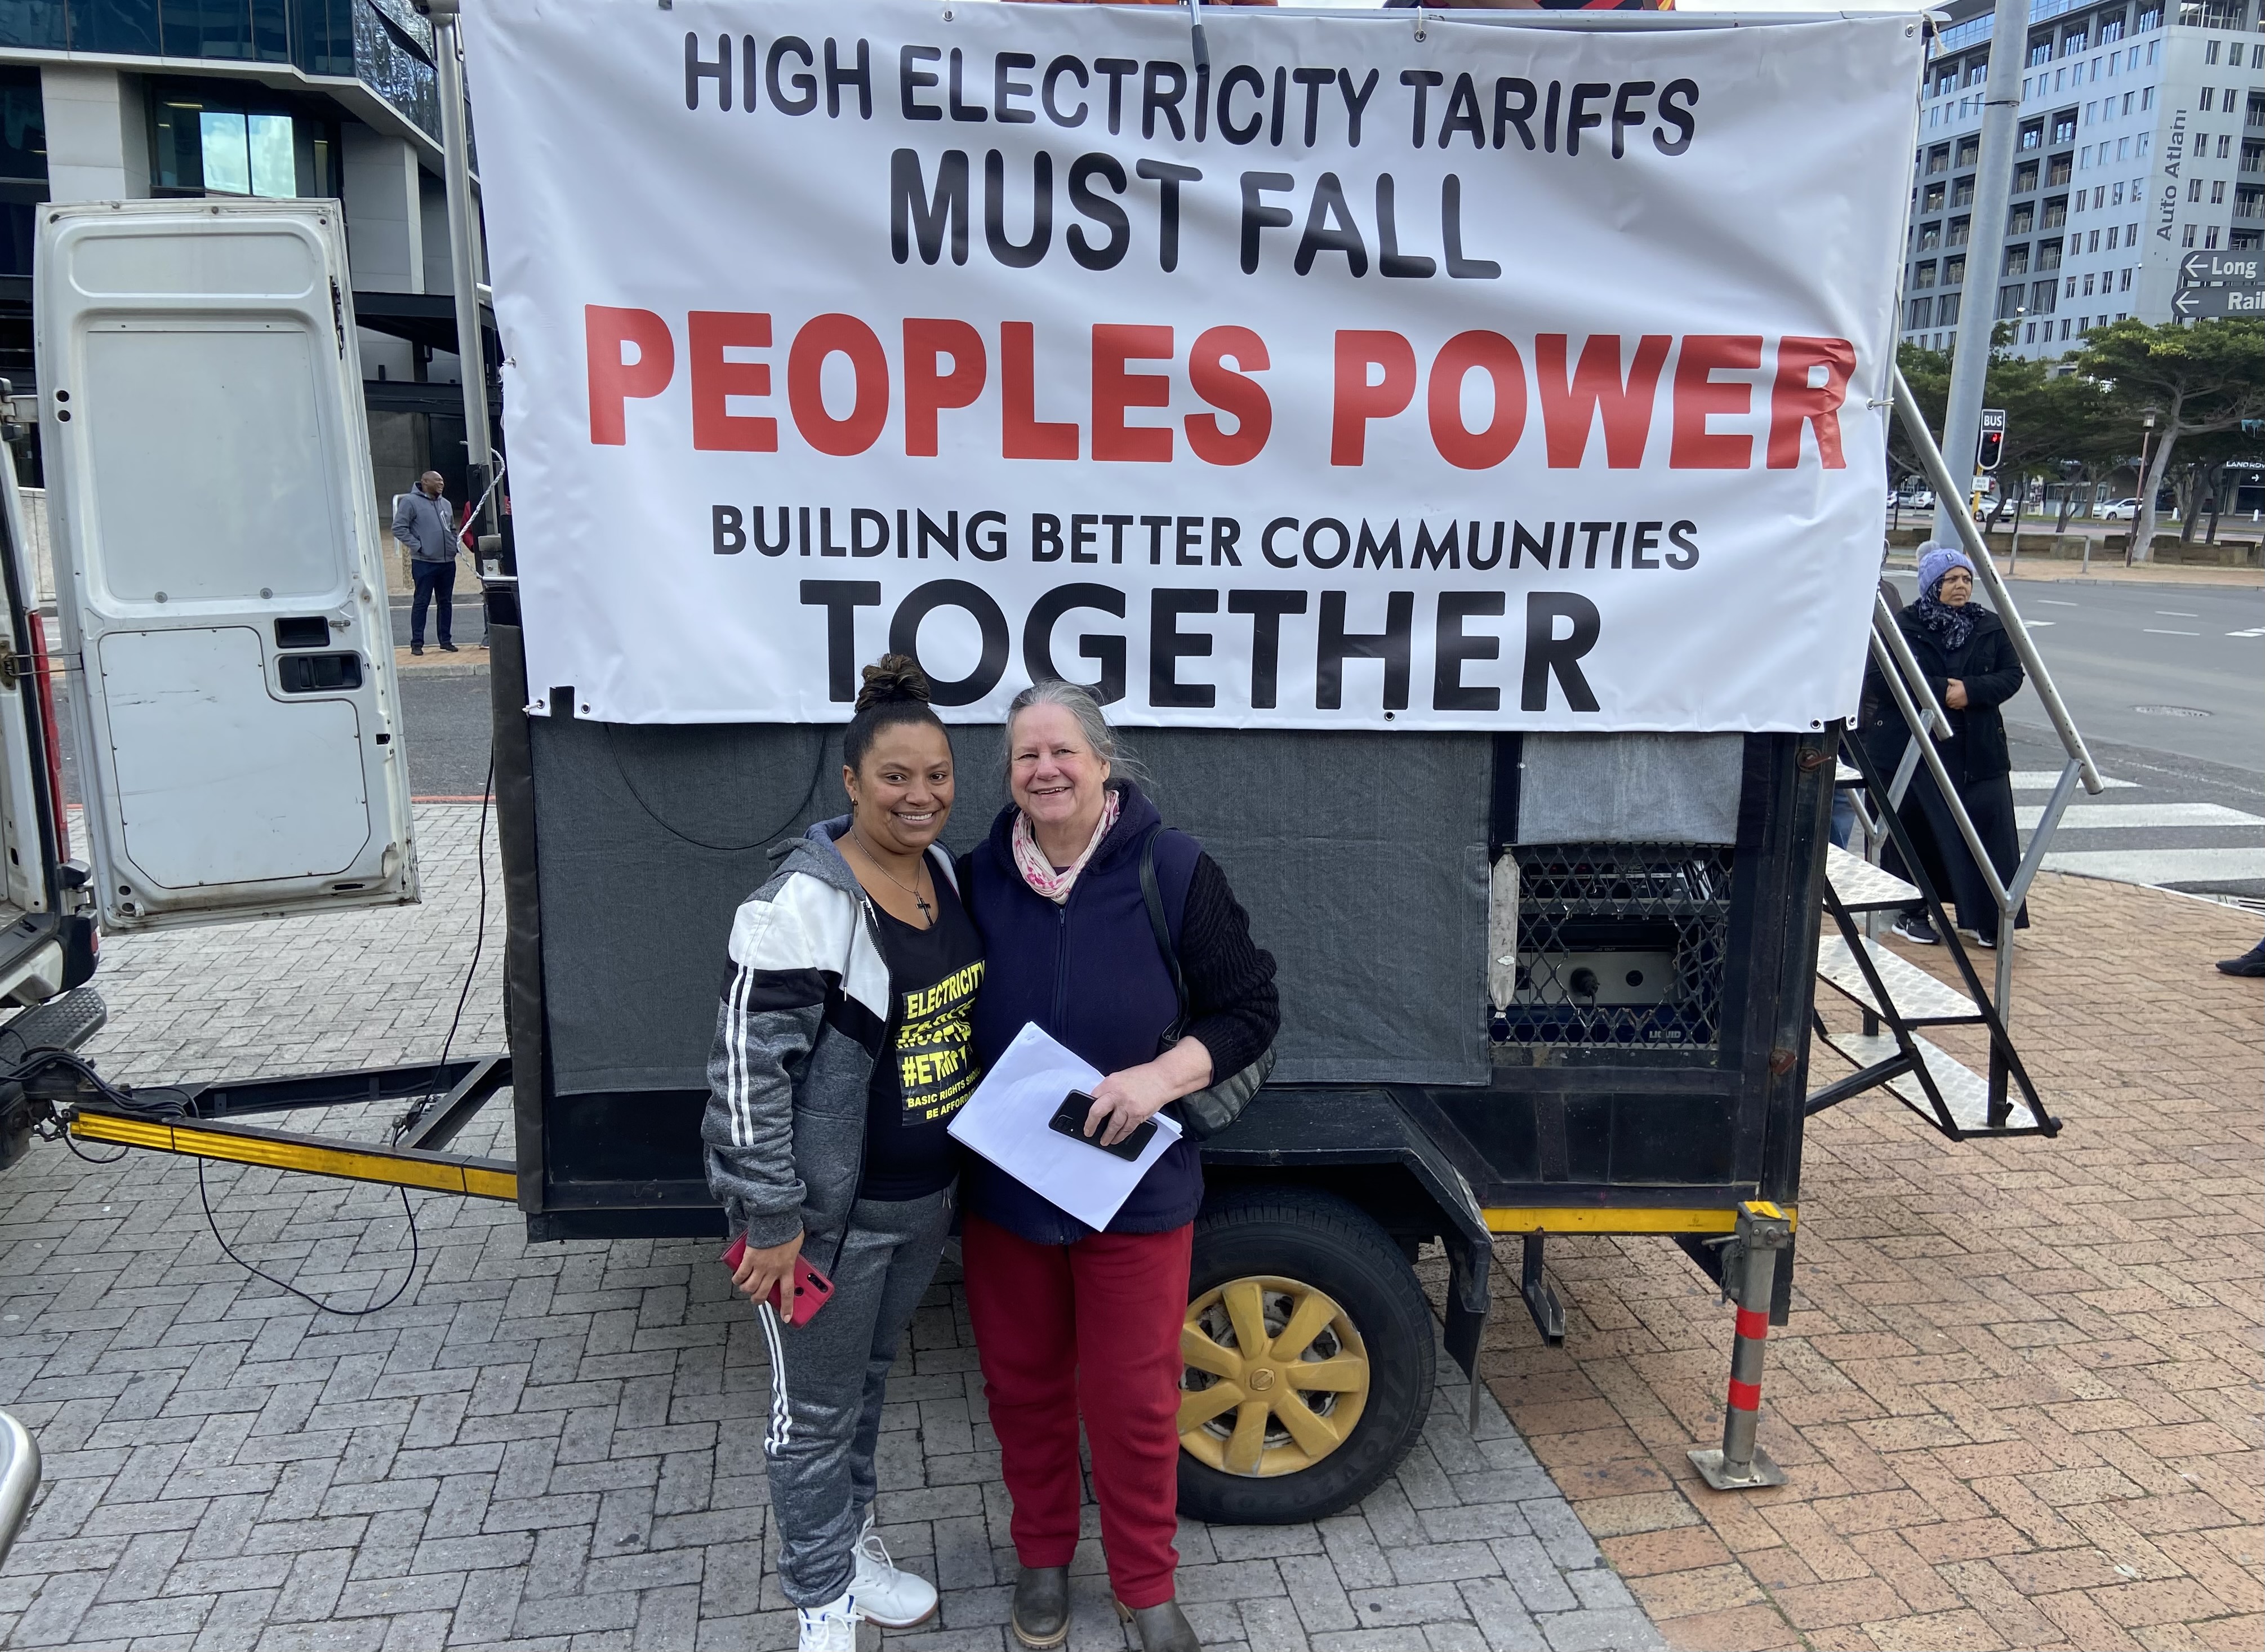 Capetonians took to the street to voice their grievances about the 17.6% rise in electricity prices